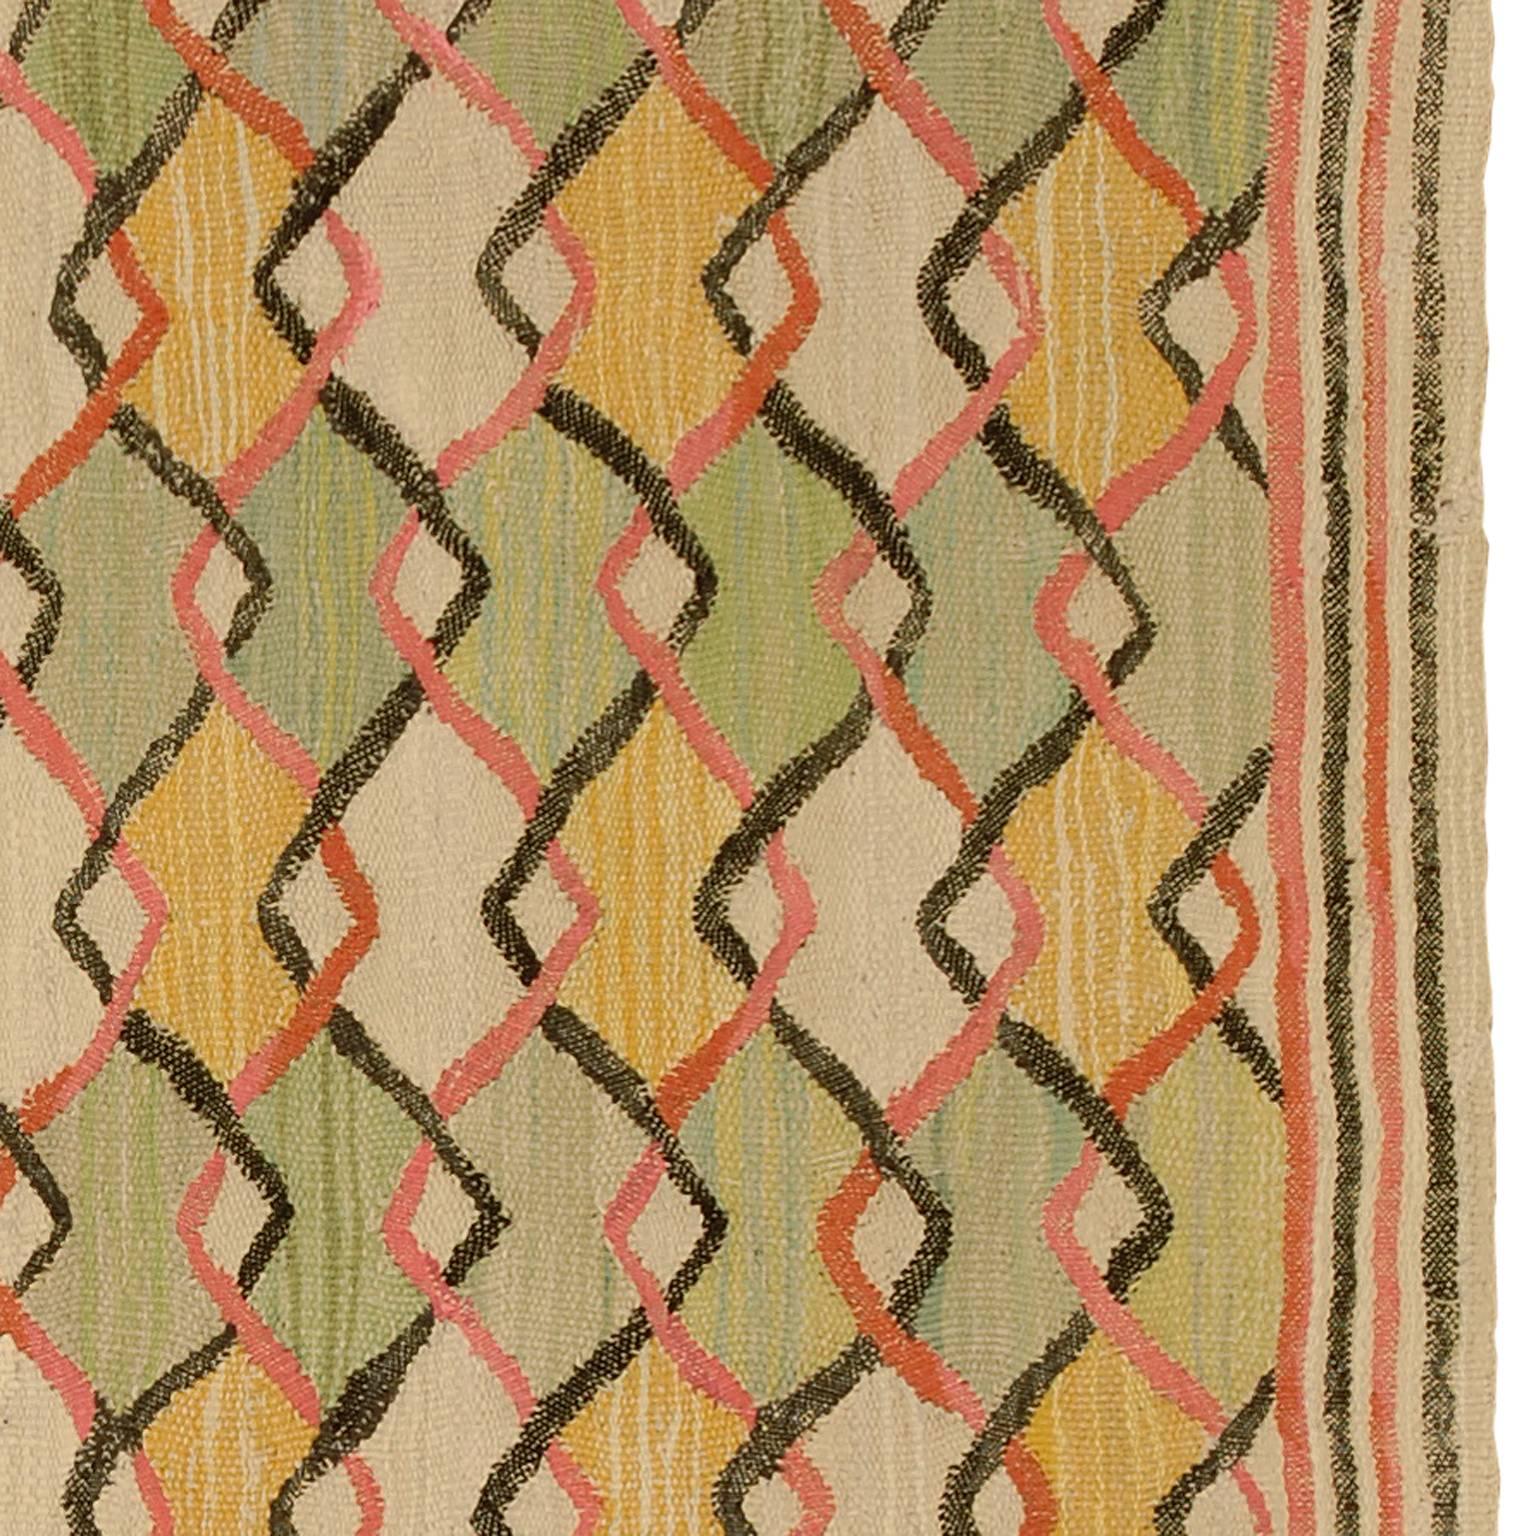 Swedish Wall Hanging, 1940s In Good Condition For Sale In New York, NY